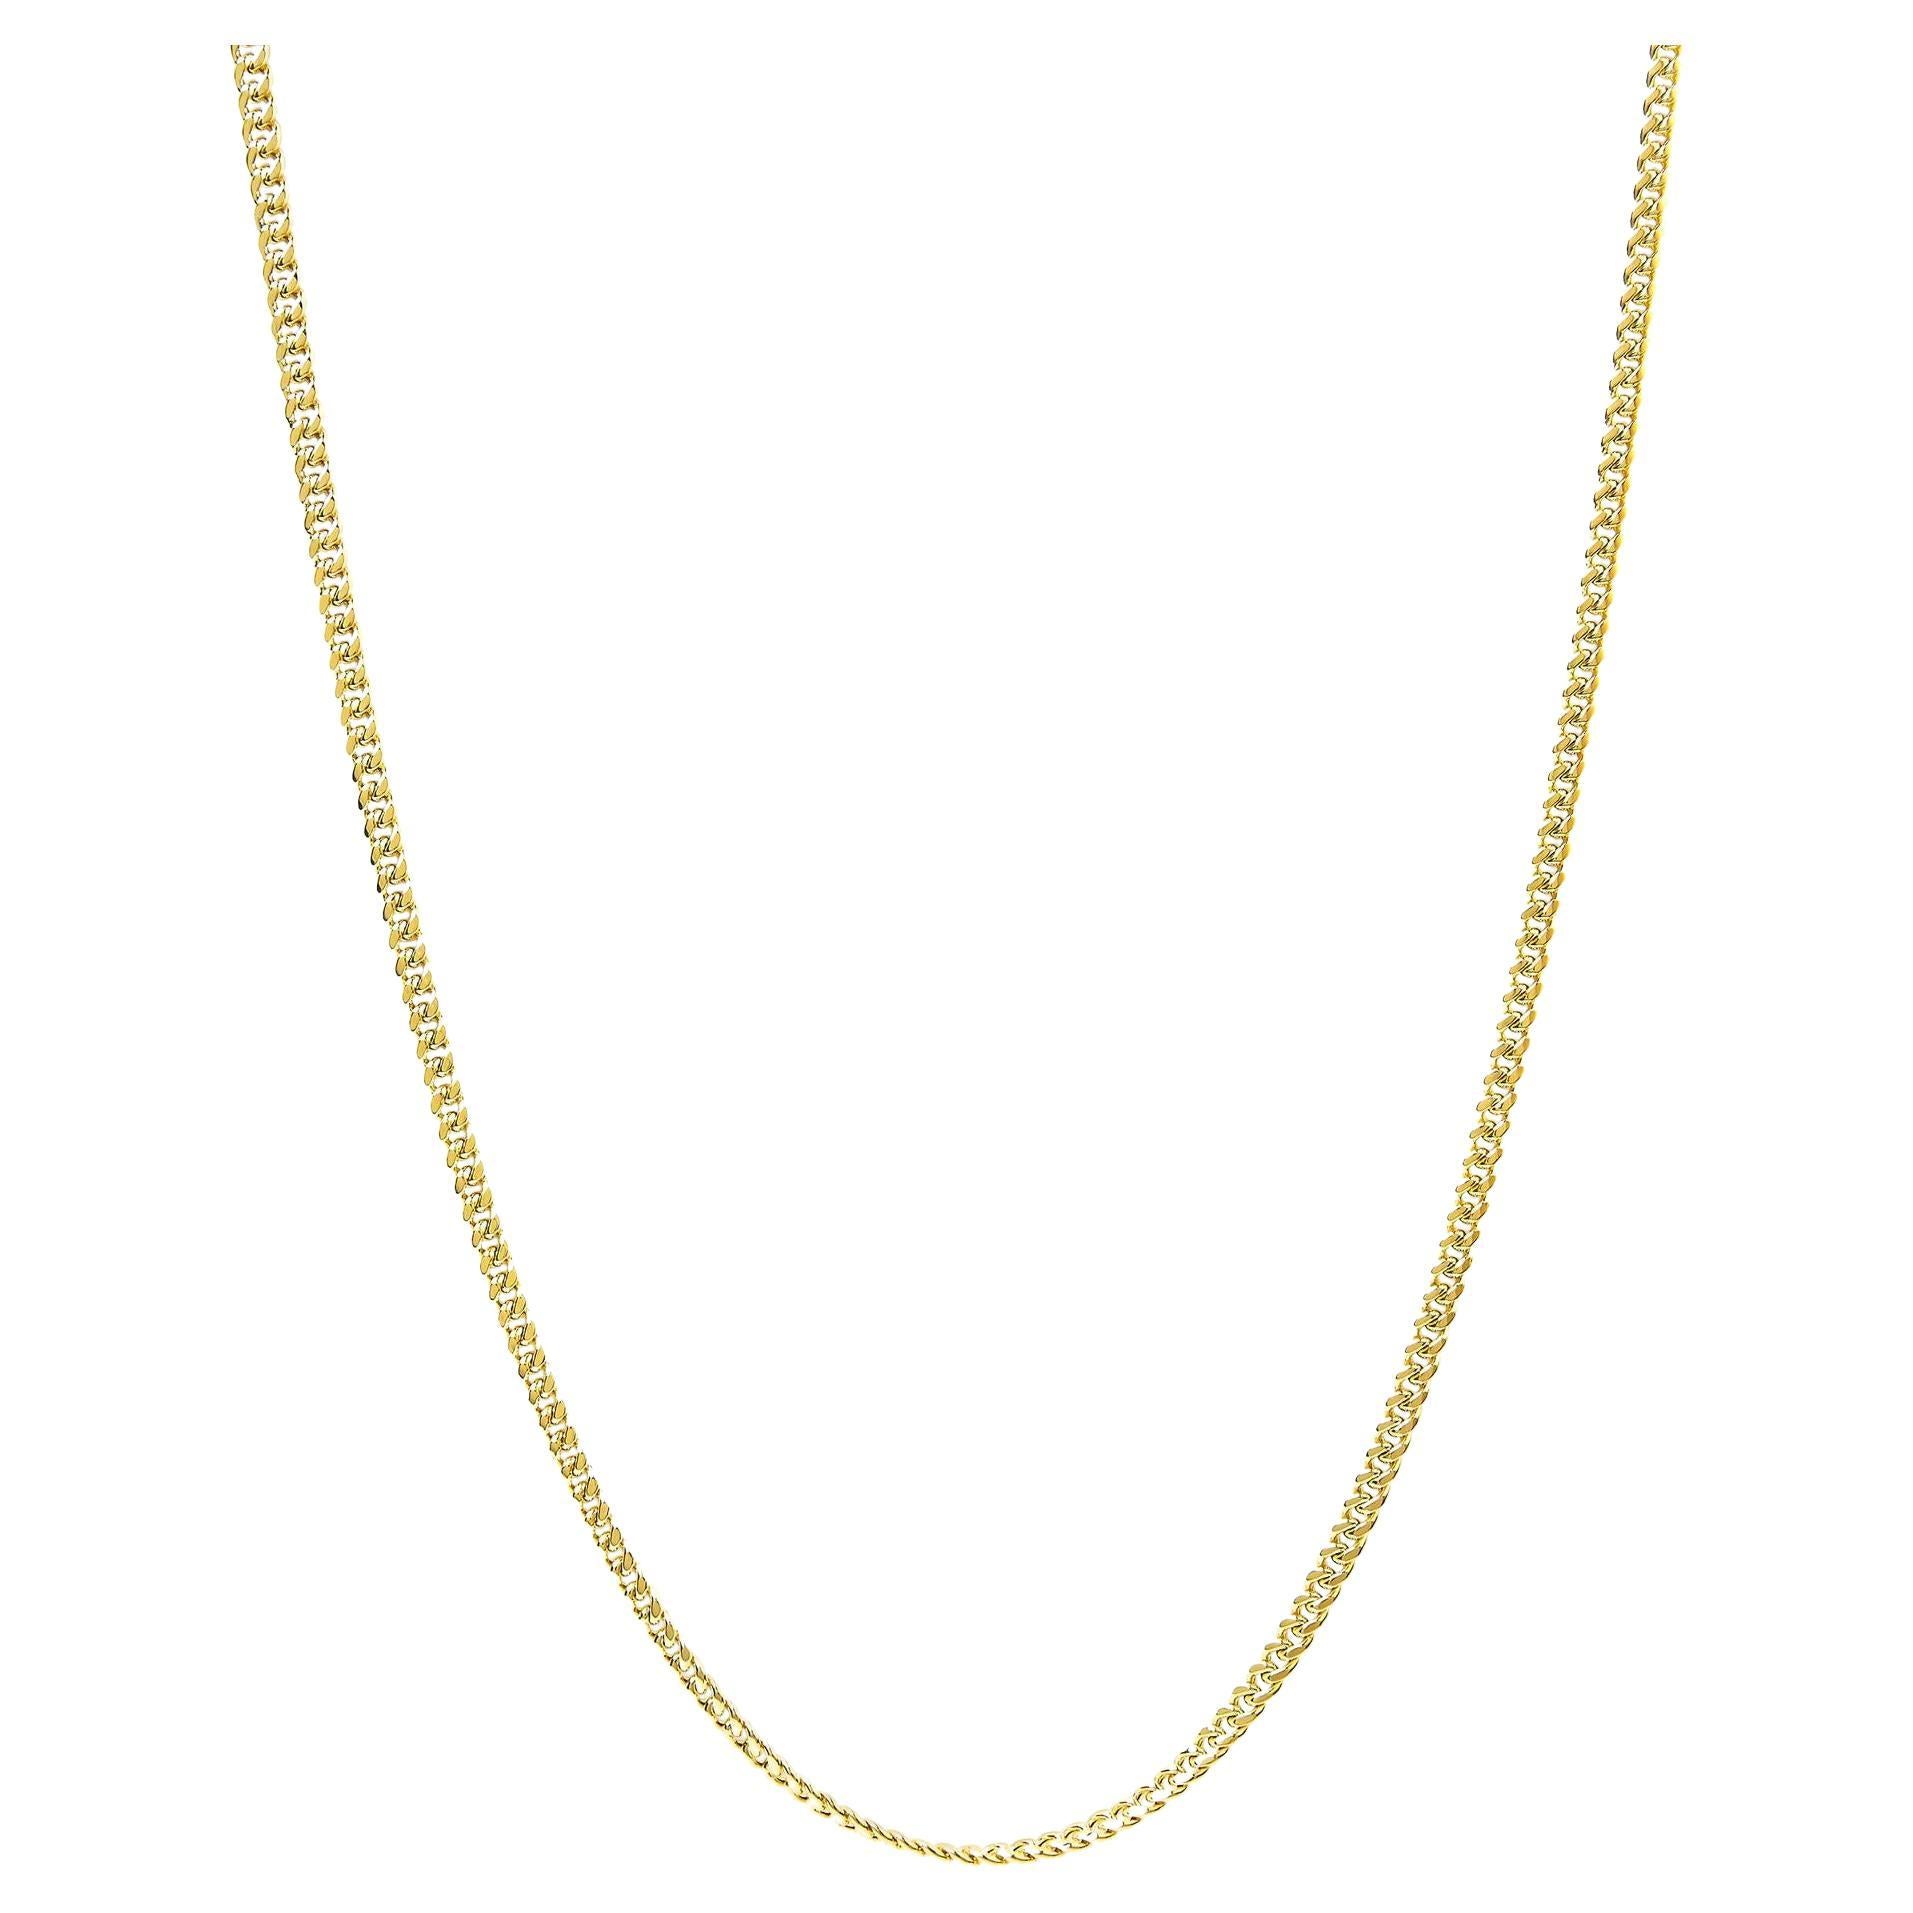 14K Yellow Gold Cuban Chain Necklace 22 Inches